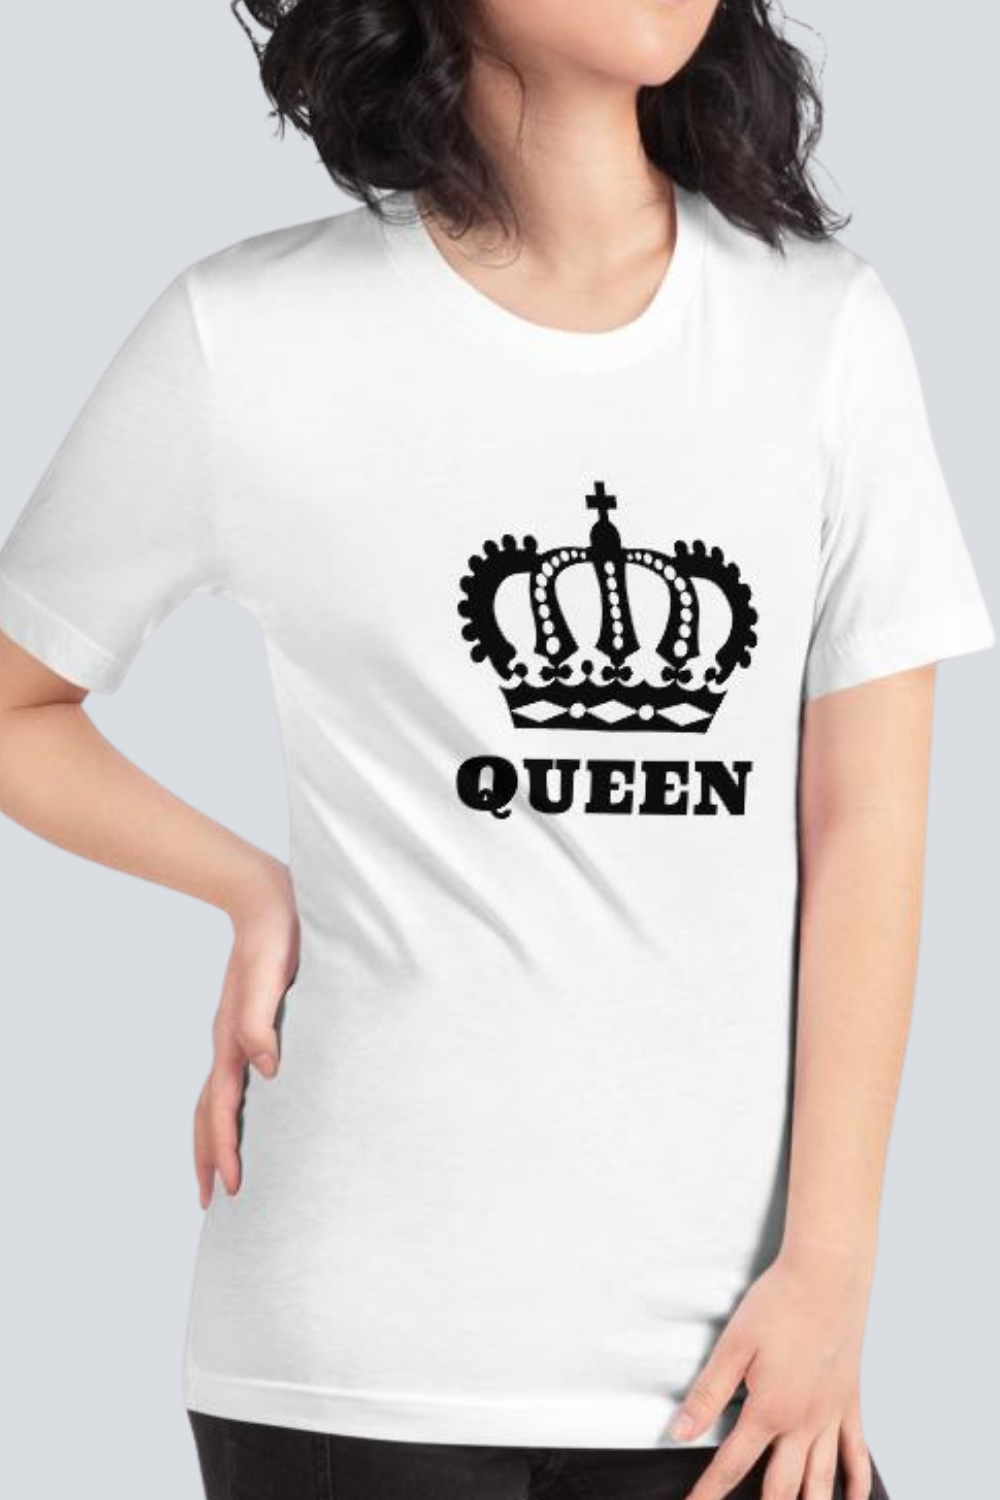 Queen T-Shirt (100% Cotton) | Royal Family Collection